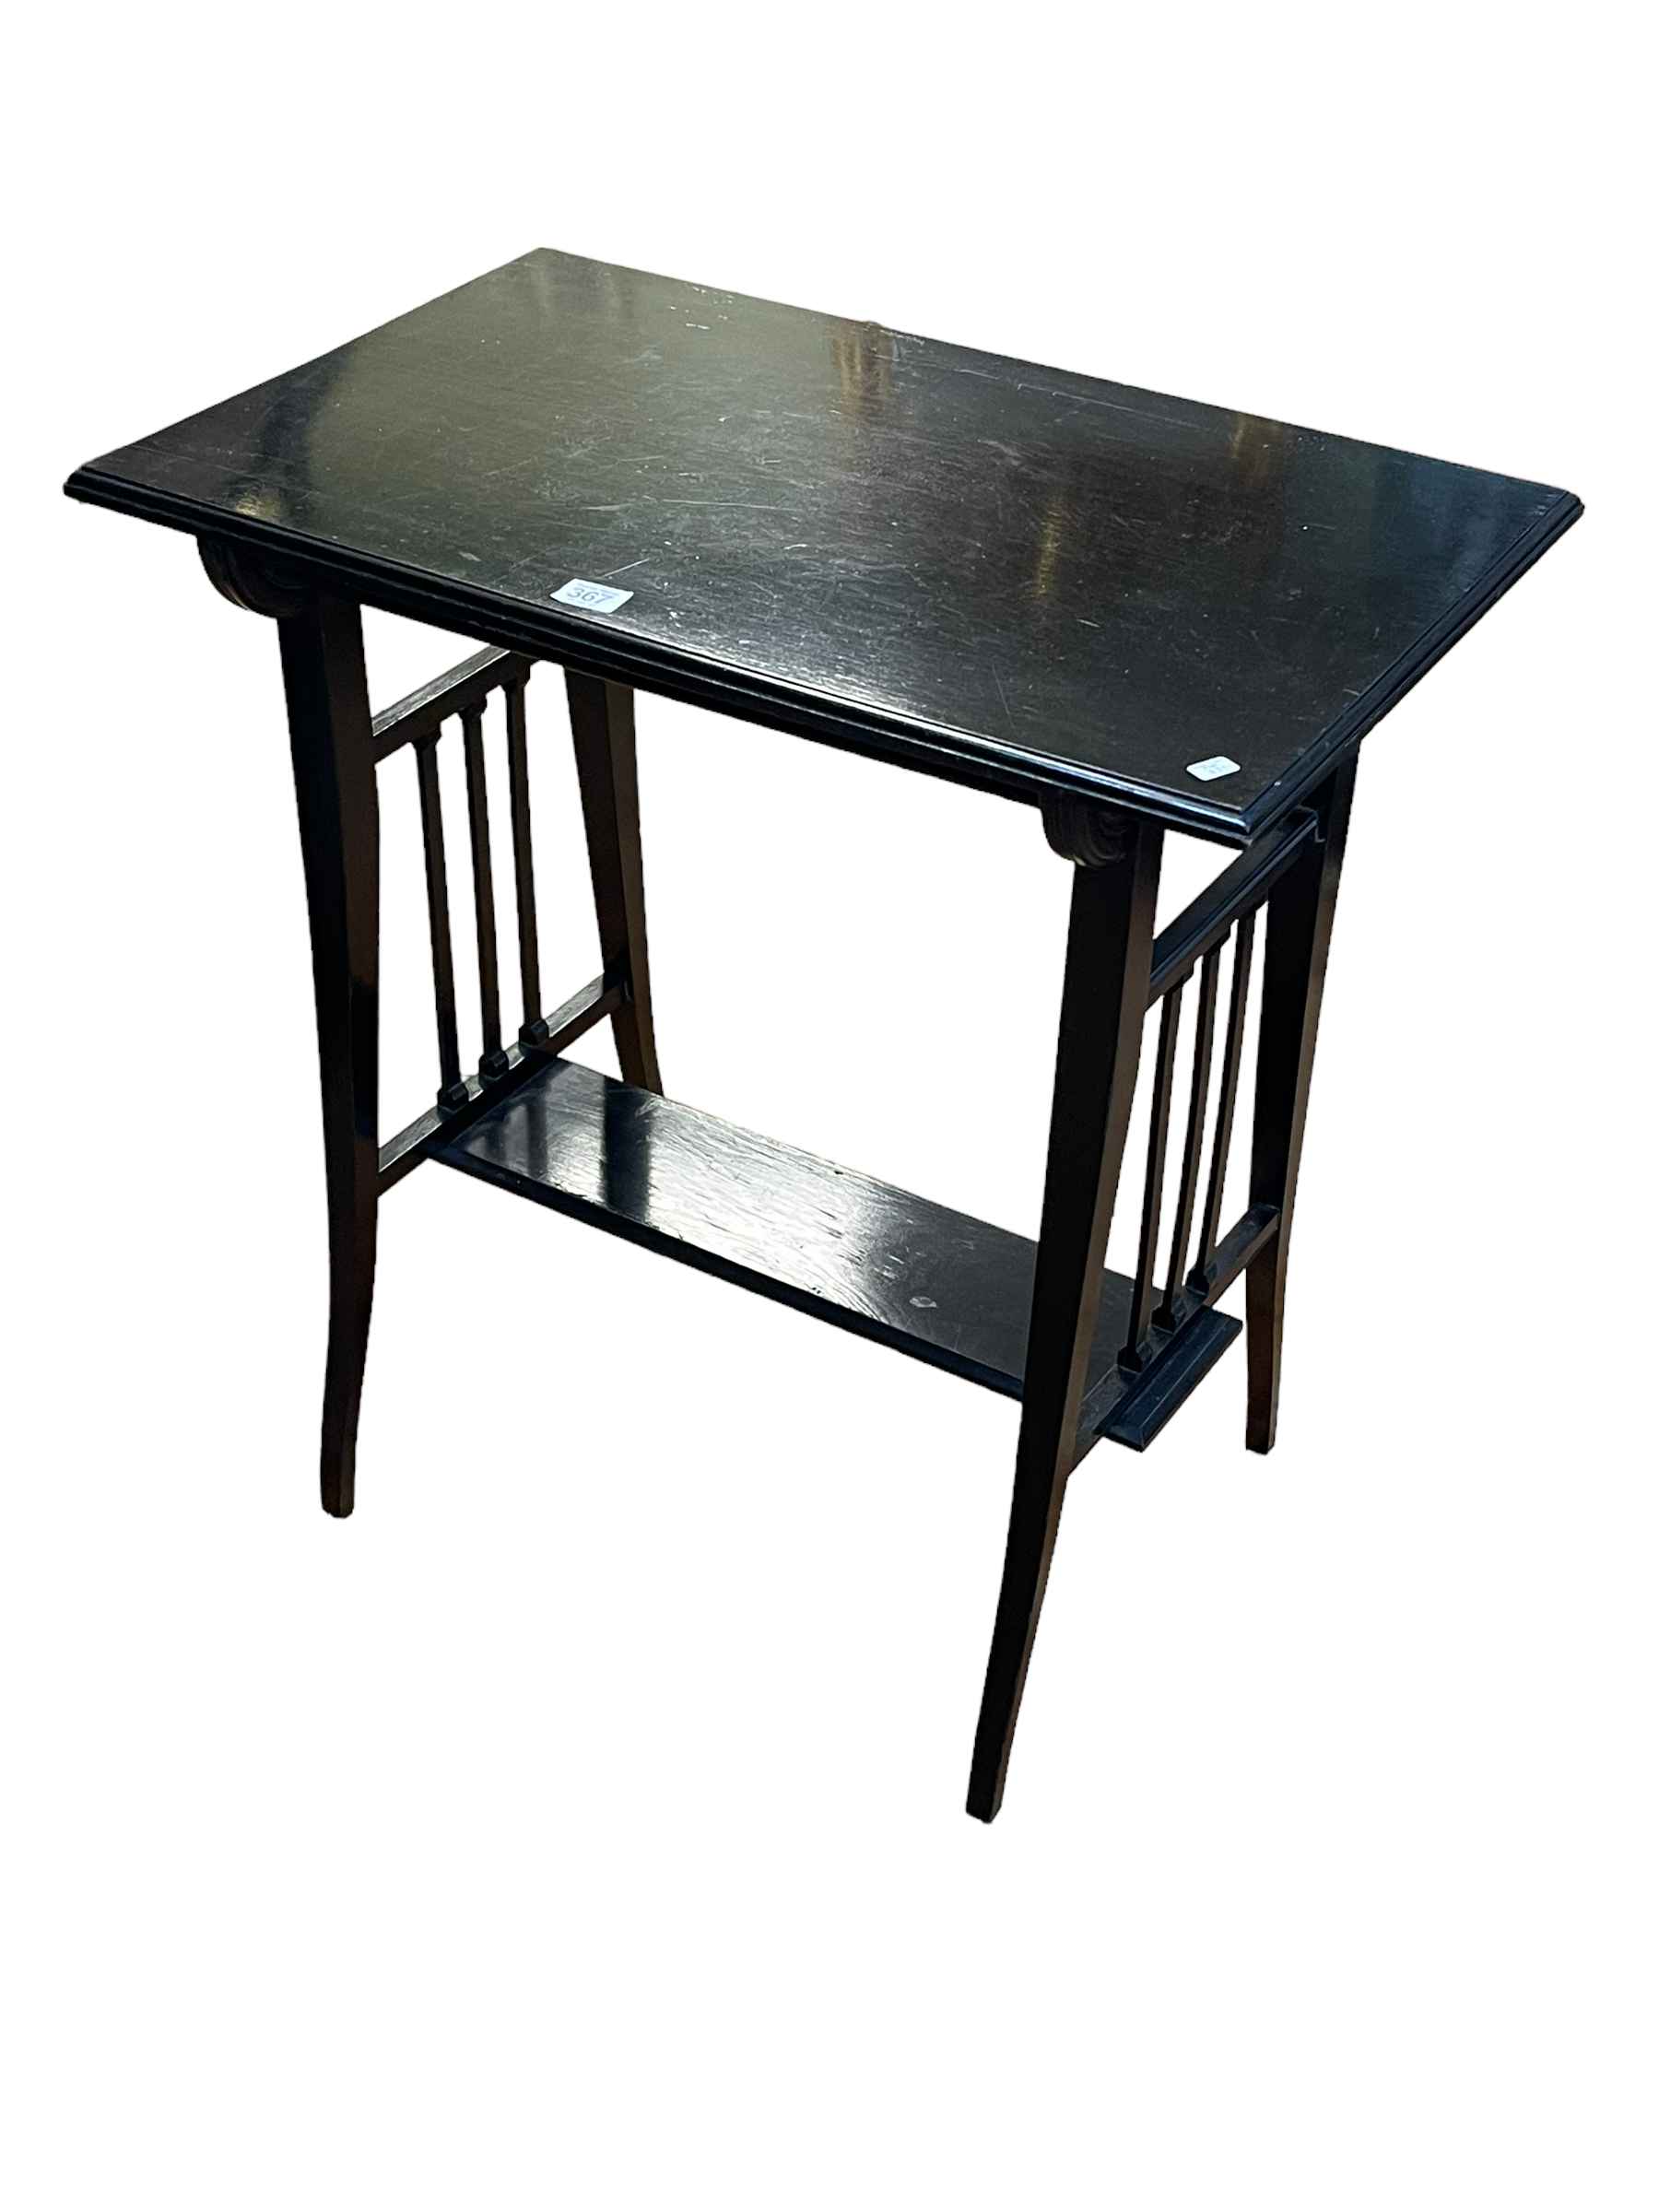 Late 19th Century ebonised aesthetic movement side table, 63cm by 39cm.